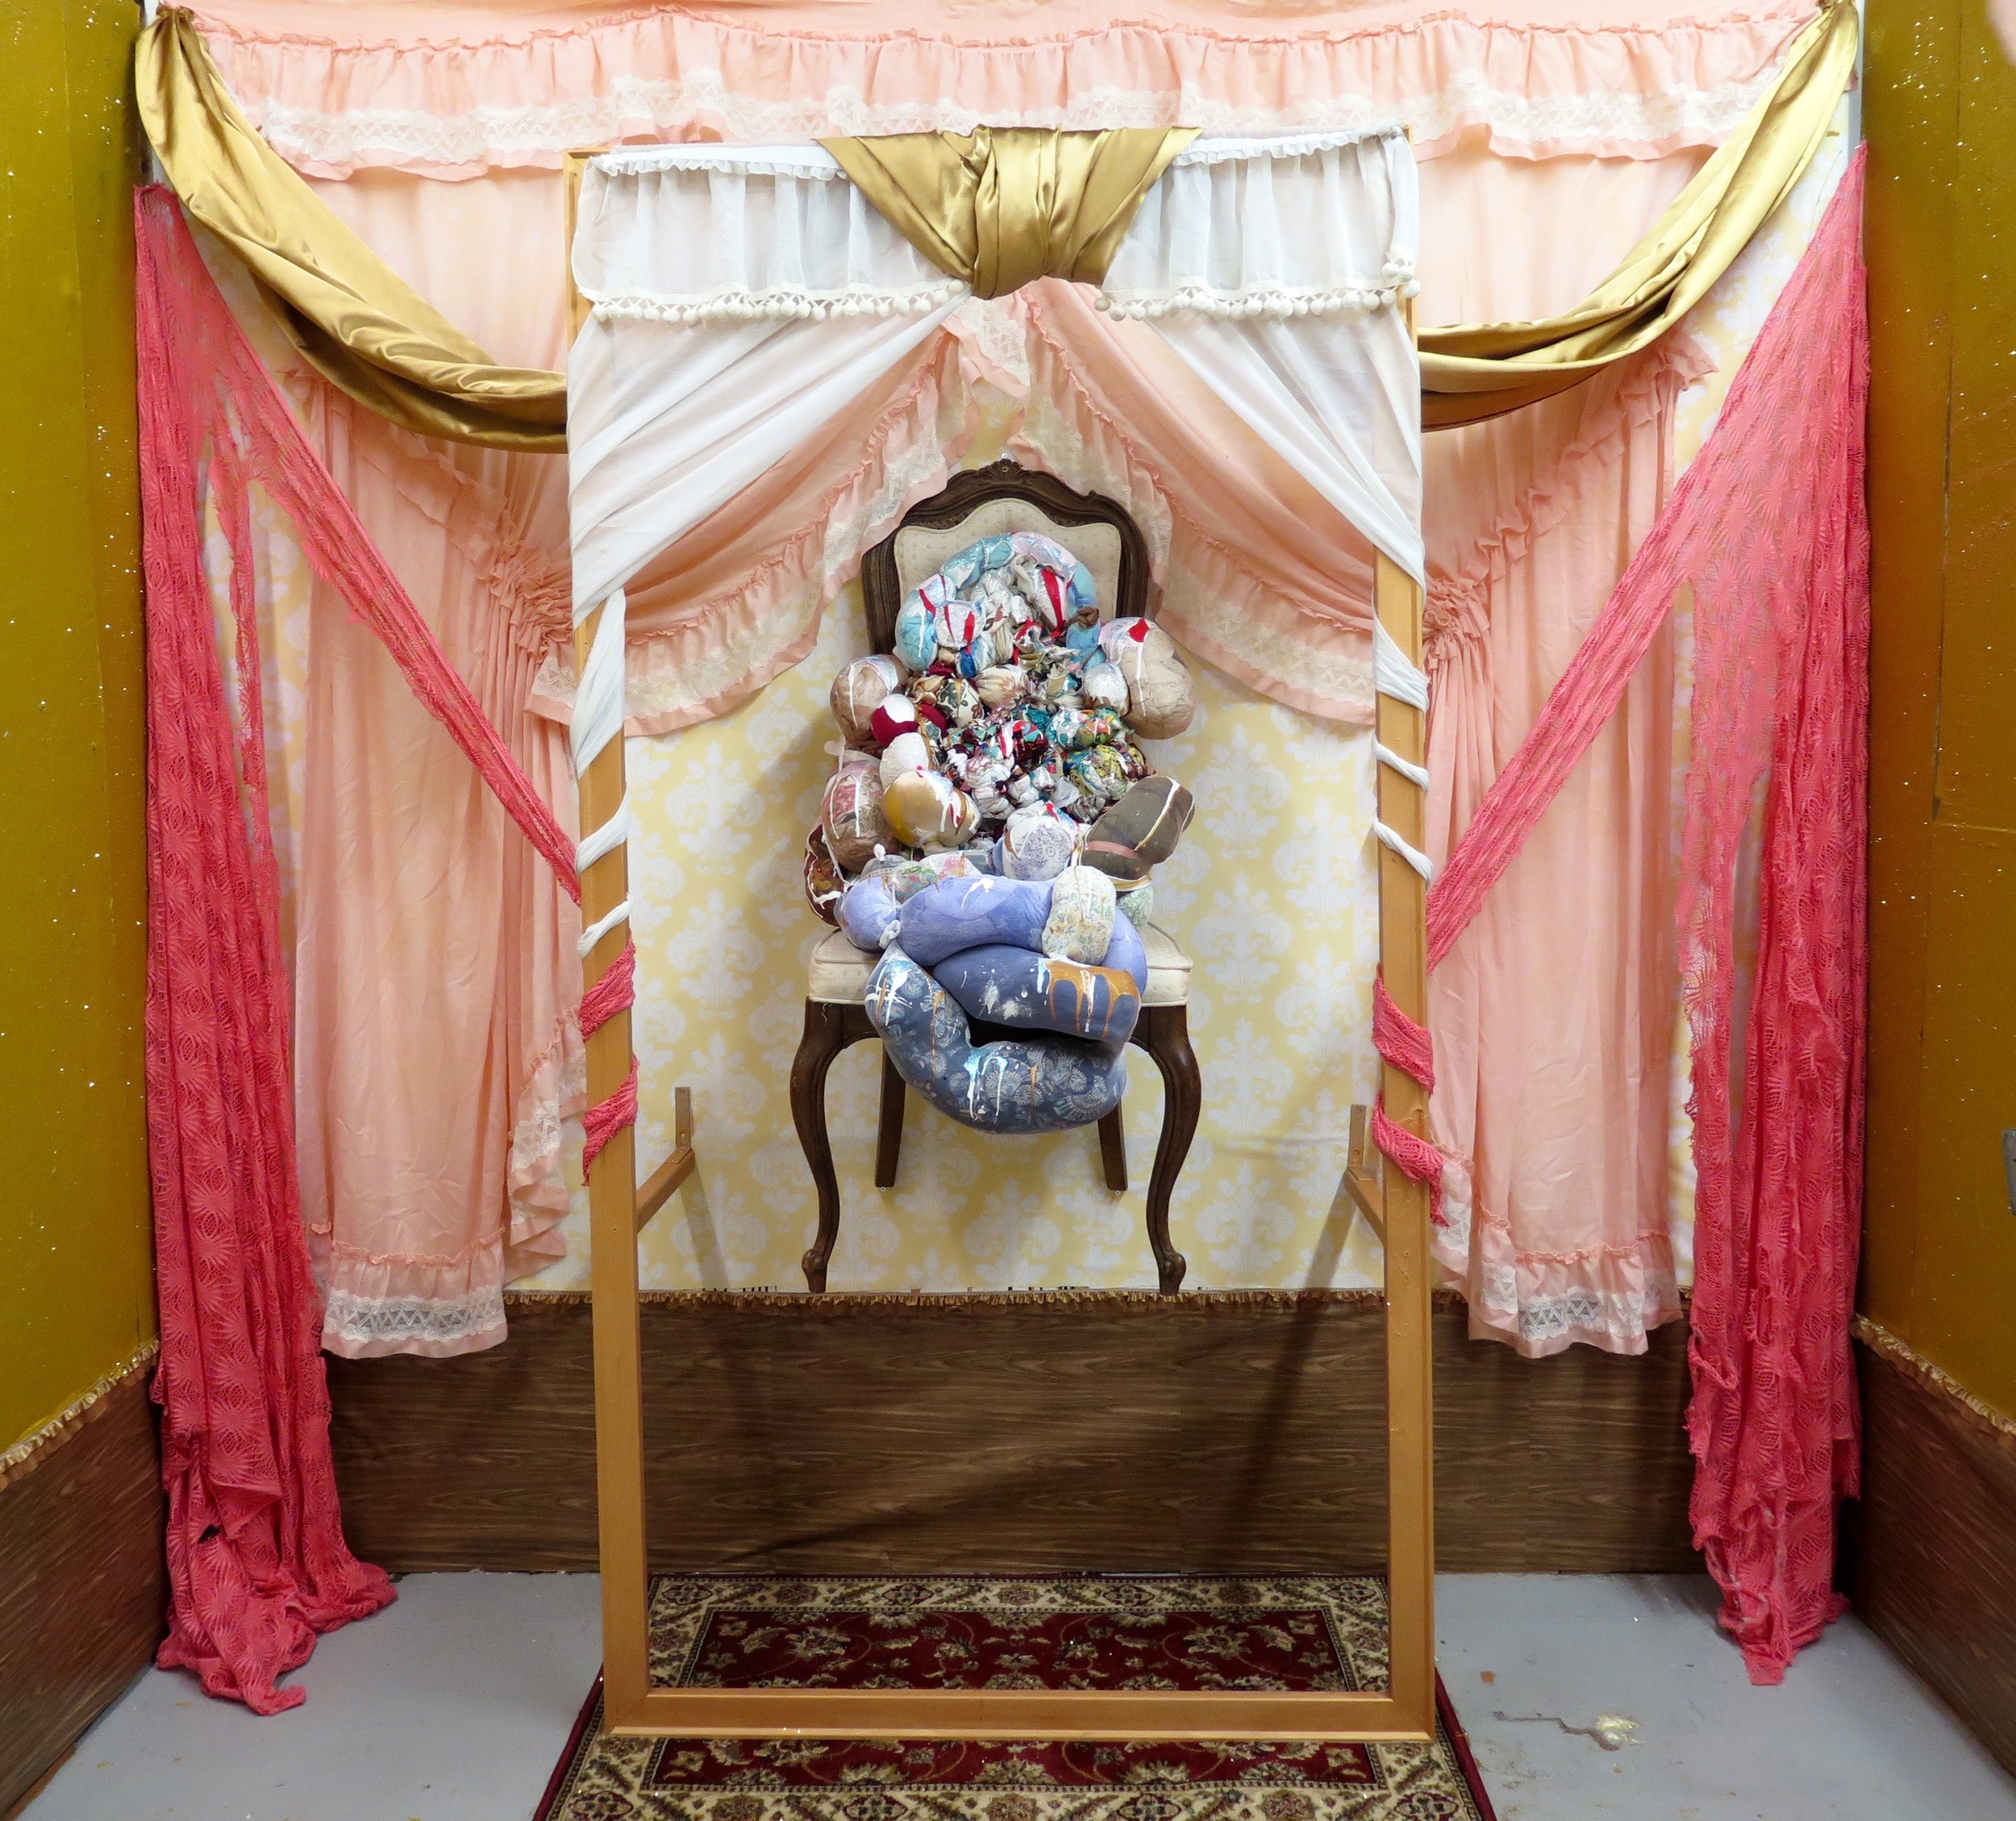  2016,  Mother Mary   Studio installation. Repurposed chair,  Hang In There  sculpture, synthetic silk fabric, lace, repurposed curtains, 88"x44" stretcher bar frame, faux-wood adhesive contact paper, frilly lace trim, damask contact wallpaper, "baby